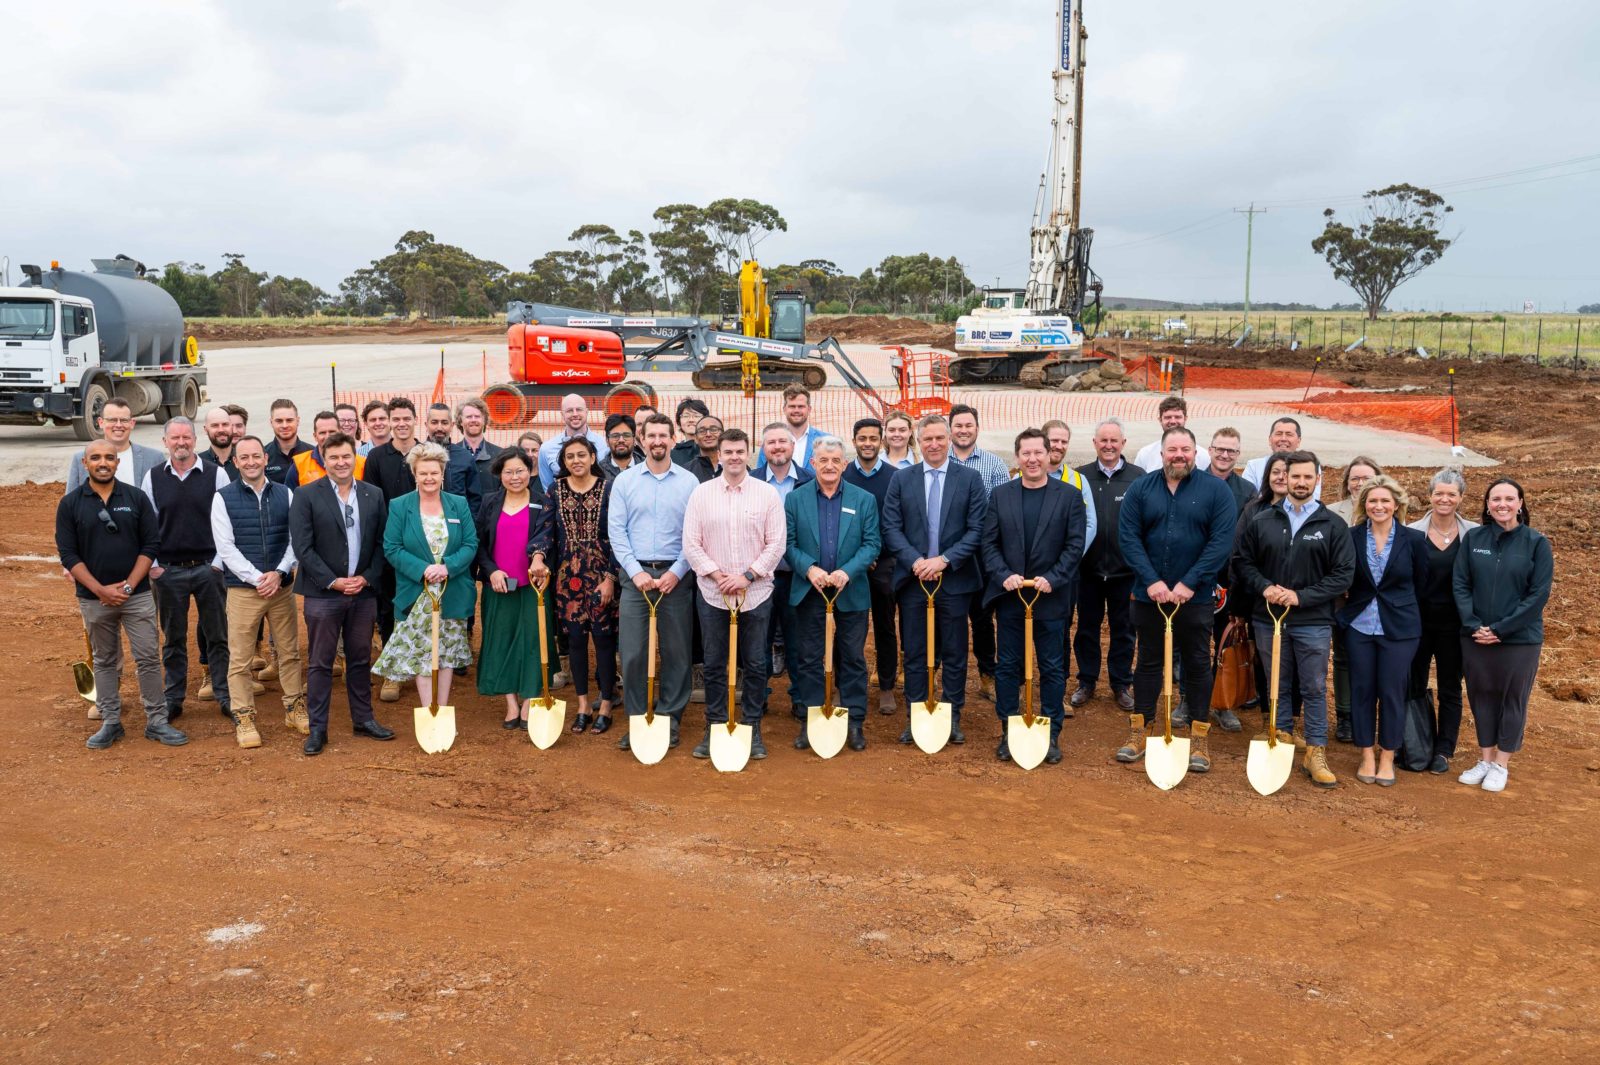 Woods road datacenter ground breaking group photo